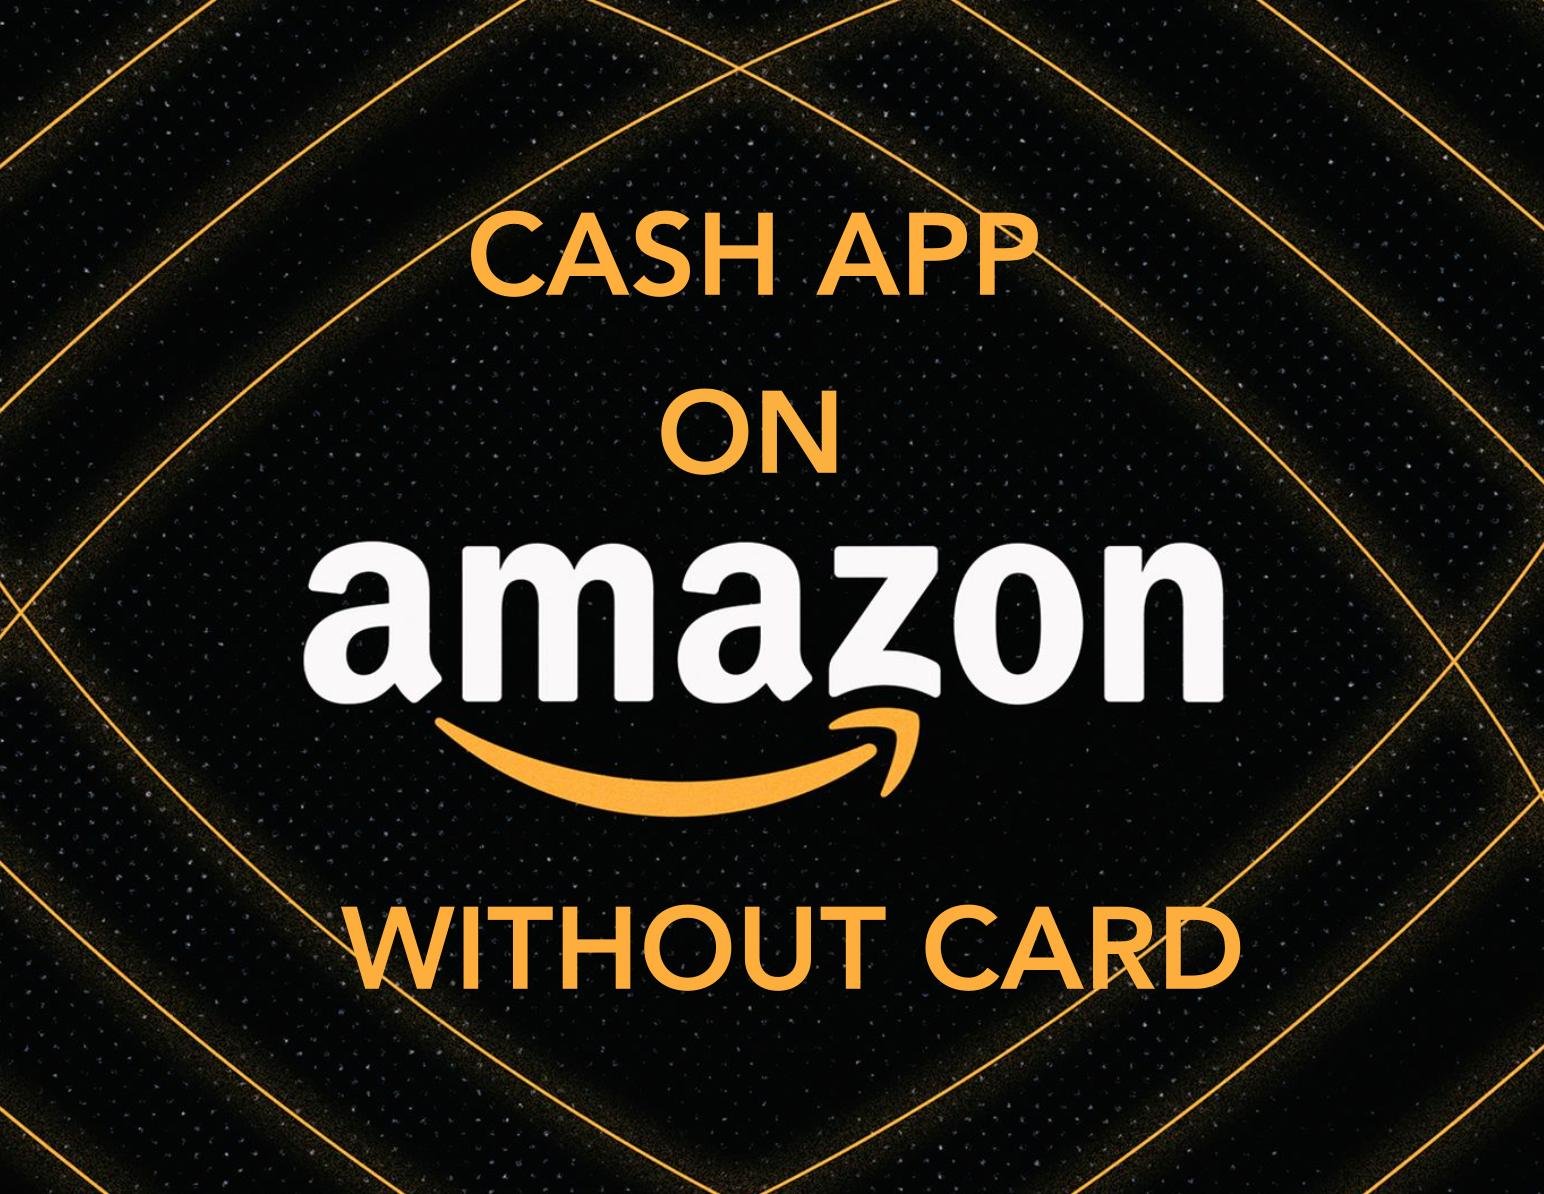 how to use cash app on amazon without card